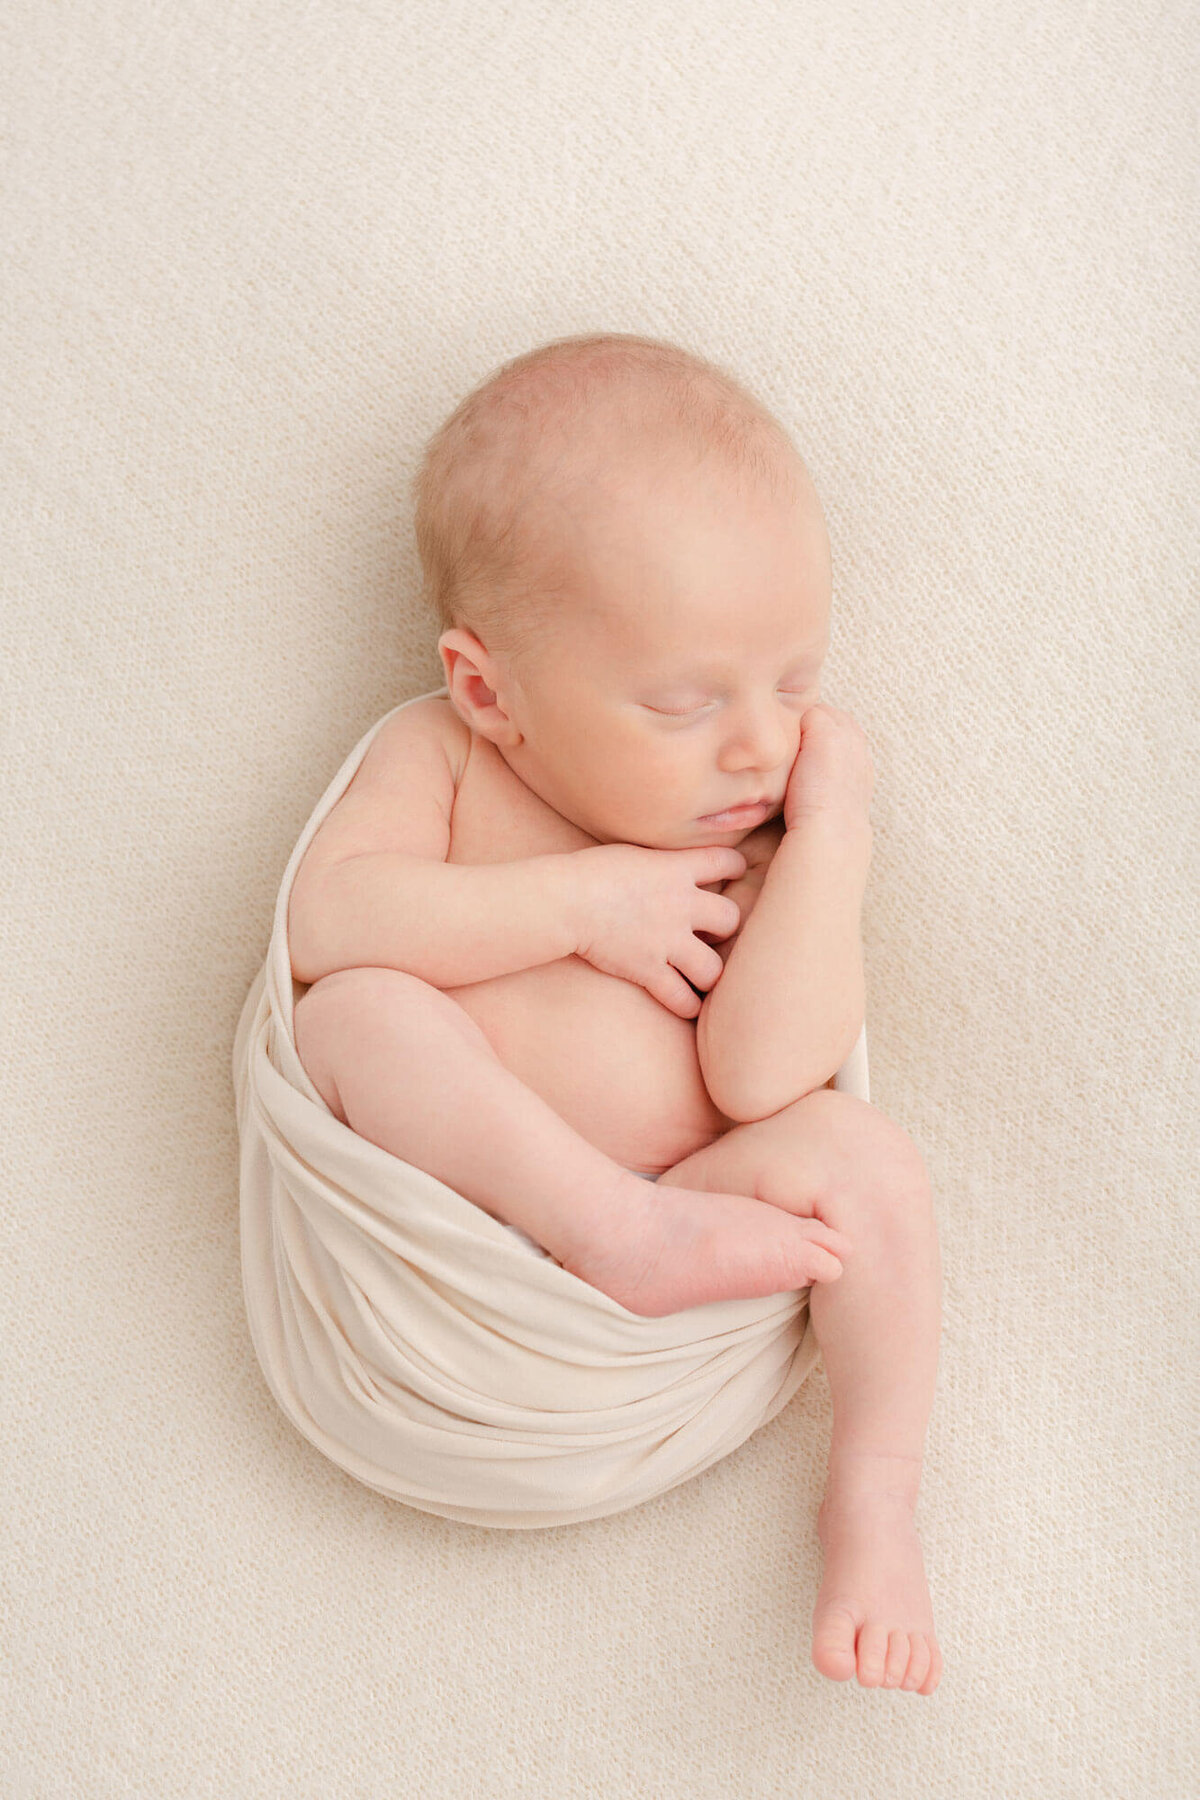 Baby swaddled in beige with arms and legs hanging out of swaddle, he looks peaceful and cozy and is laying on a beige blanket.